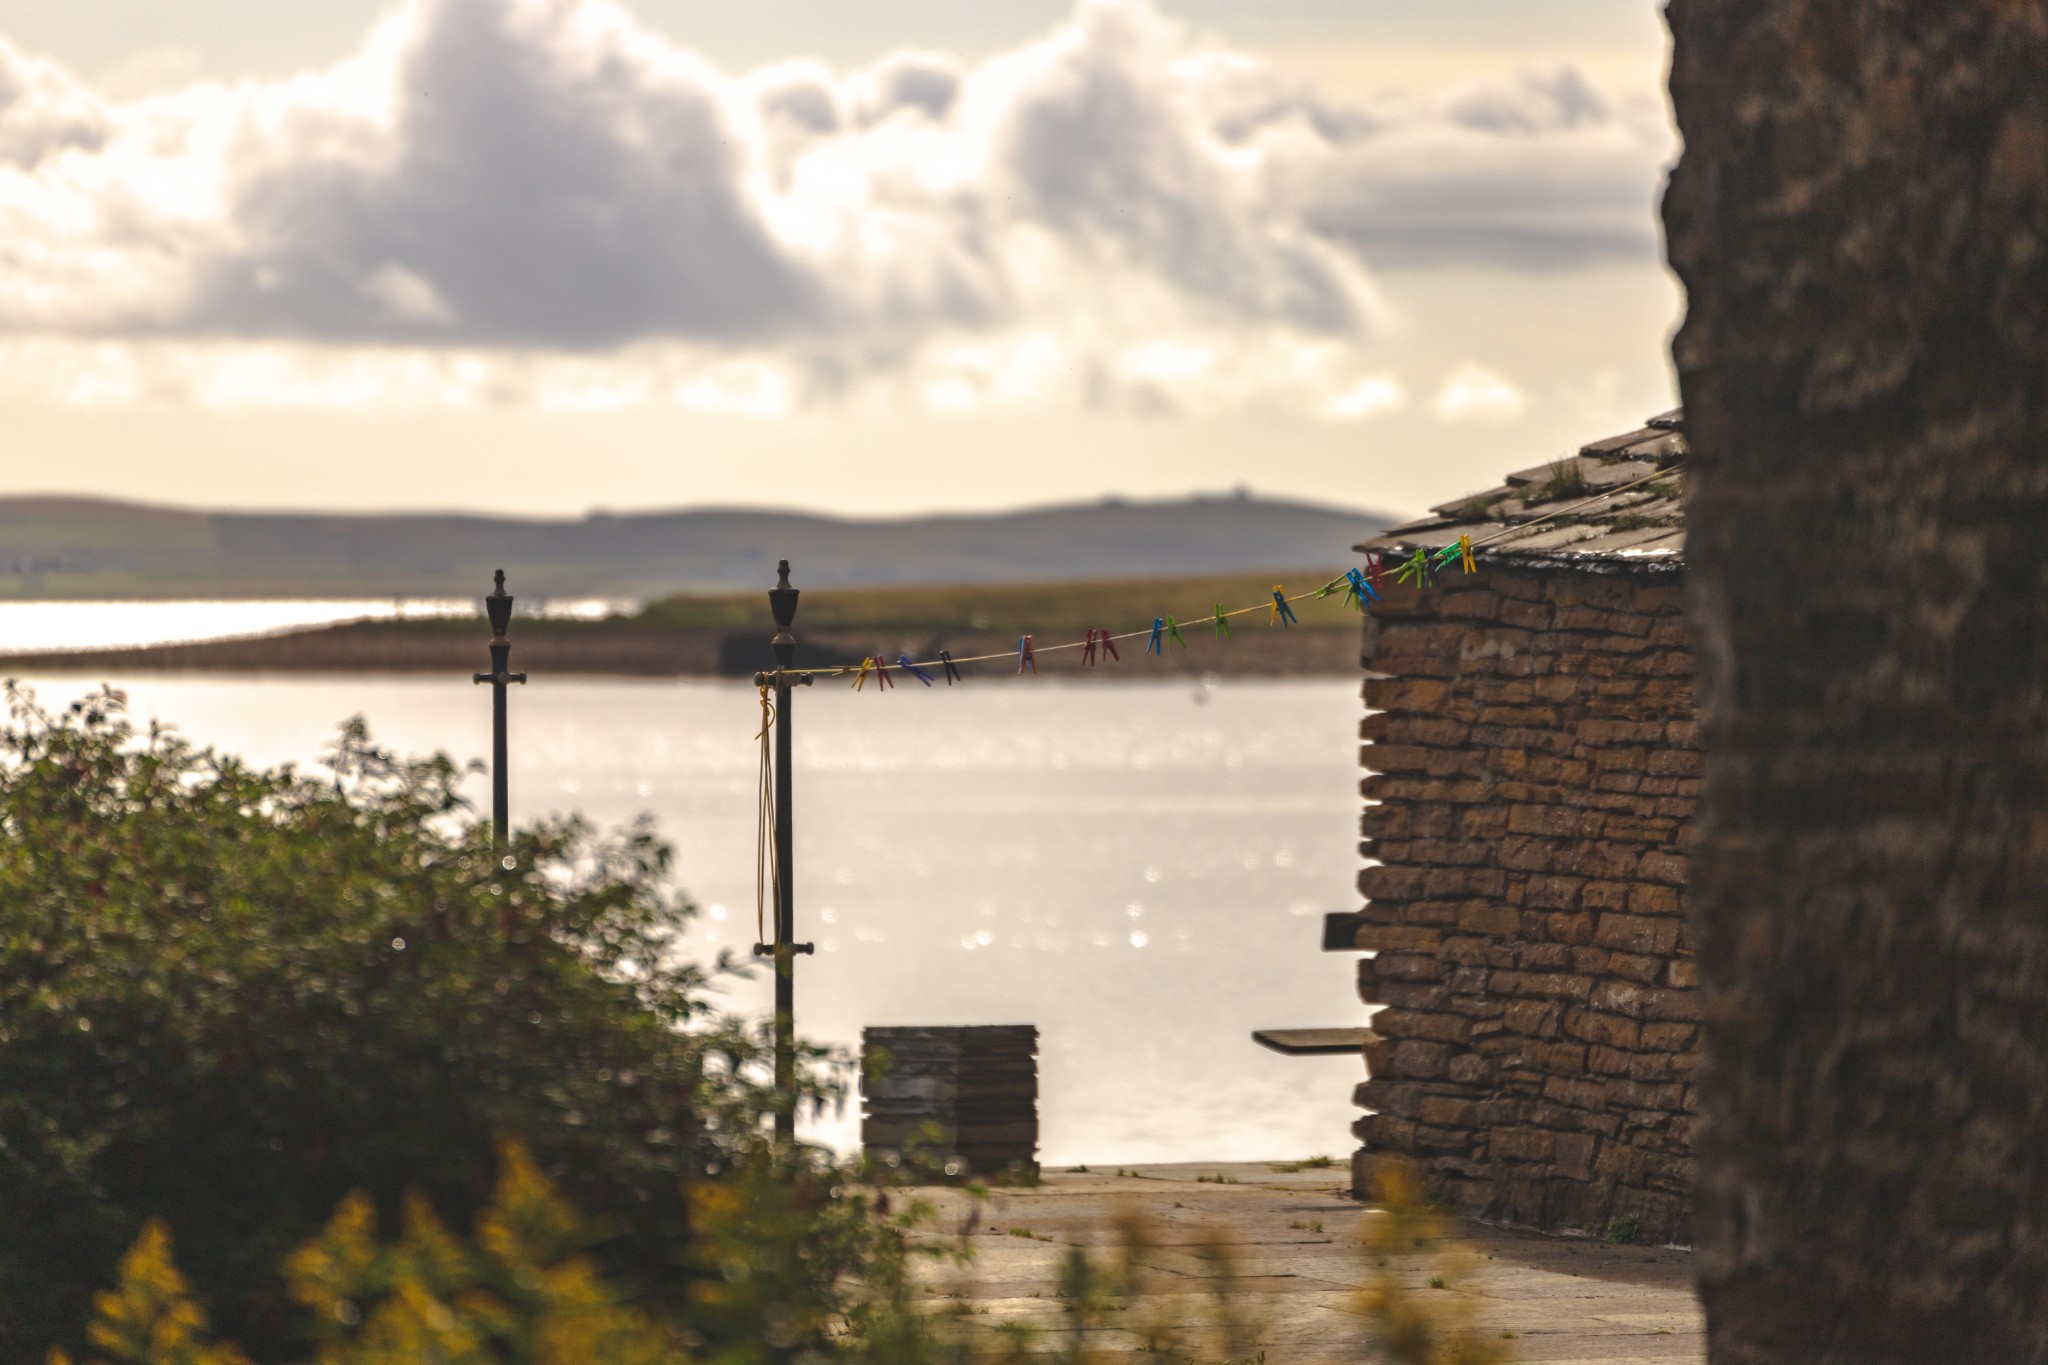 A Stromness washing line, Orkney - image by Ally Velzian